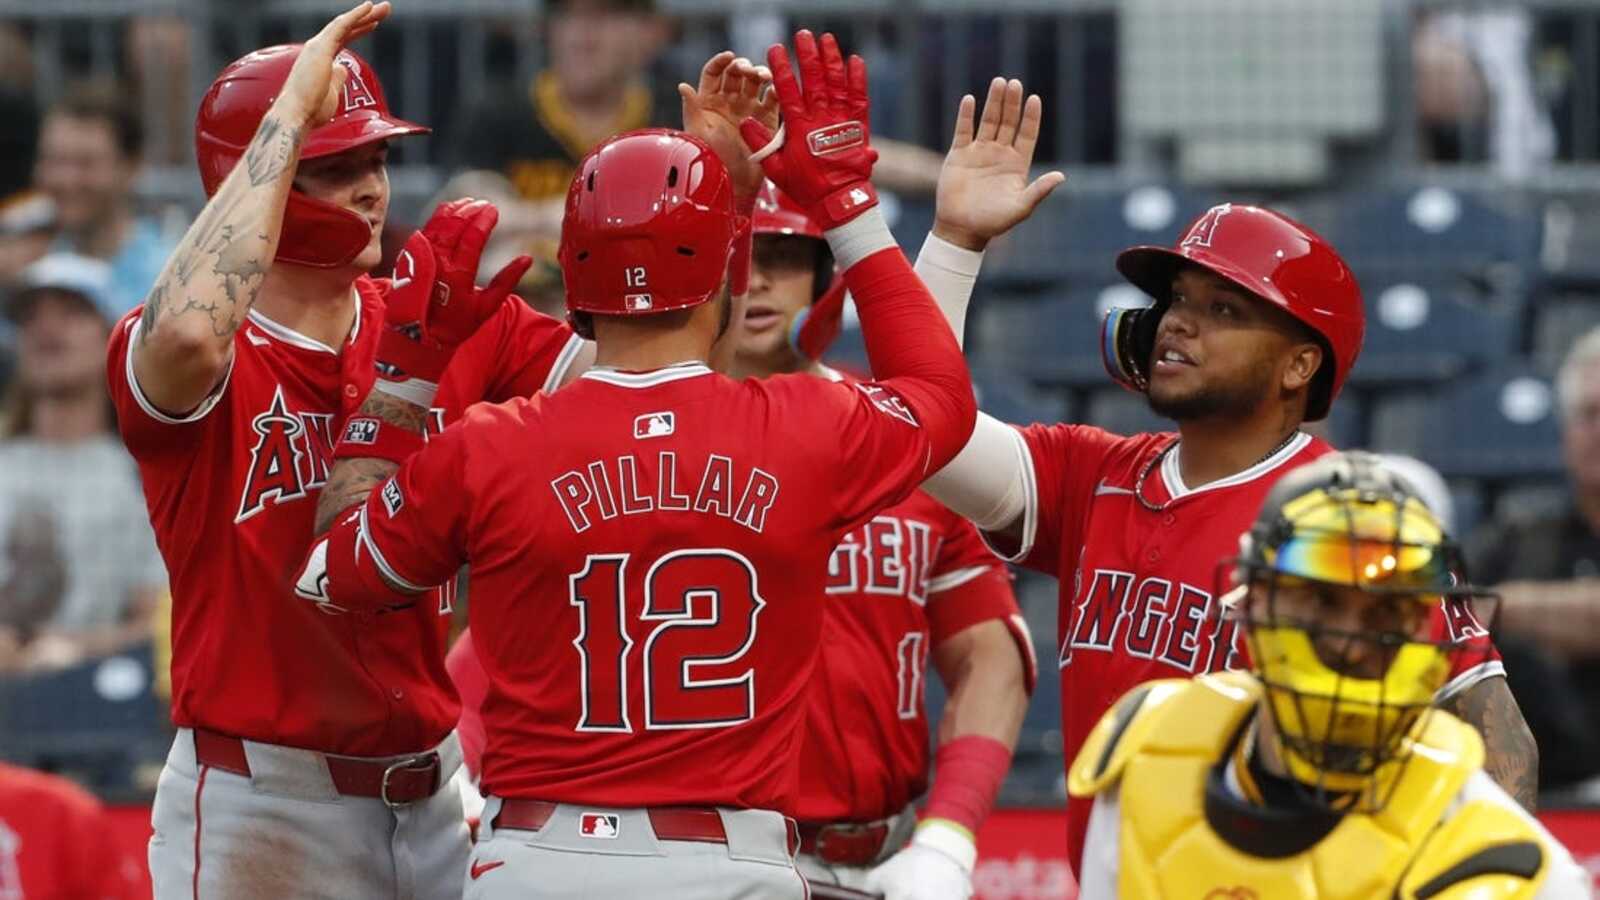 Kevin Pillar homers twice, drives in 6 as Angels crush Pirates